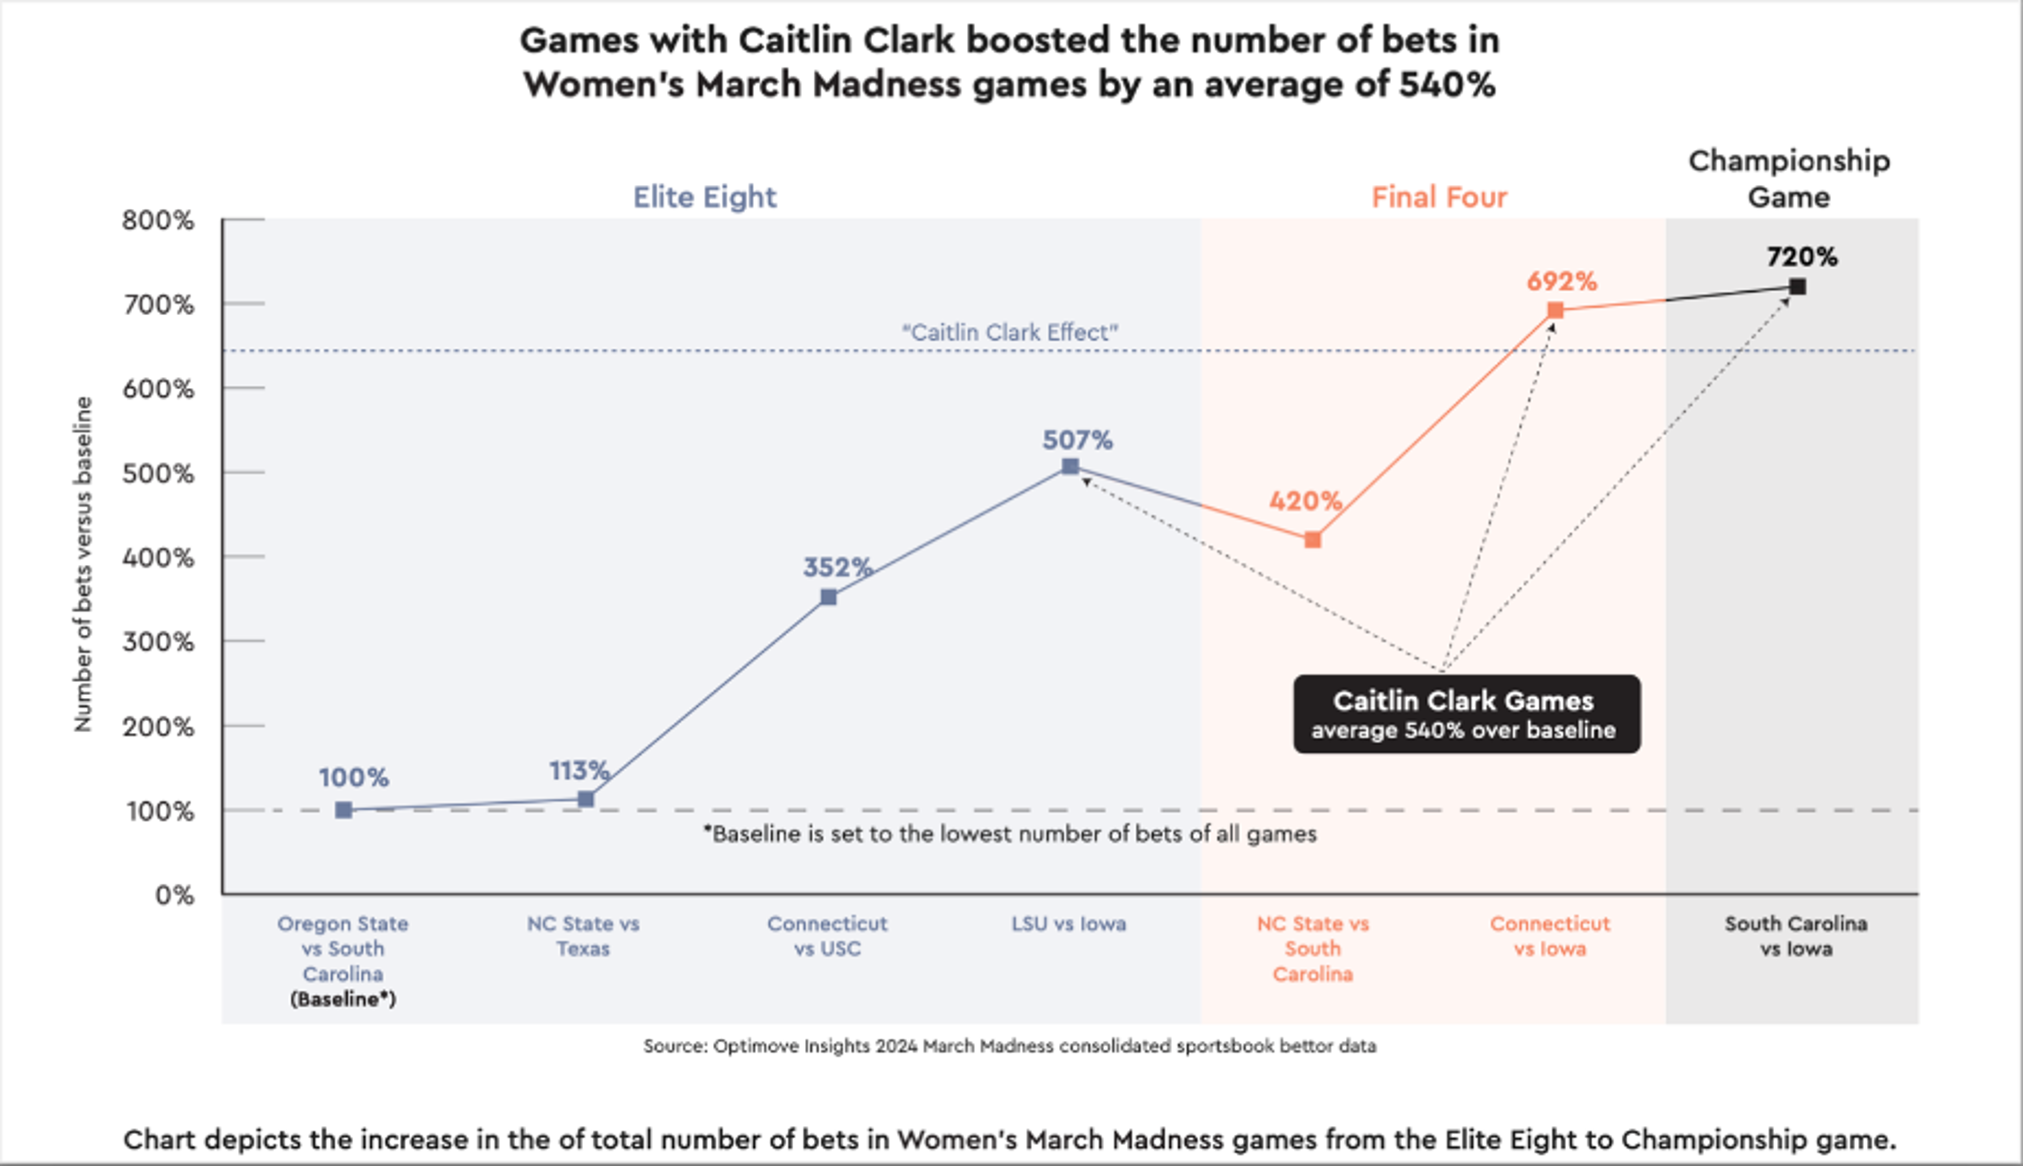 Games featuring Caitlin Clark saw an average 540% increase in bets compared to the baseline. This suggests a significant influence of individual players on the betting landscape, emphasizing the role of star power in driving fan engagement and betting interest.